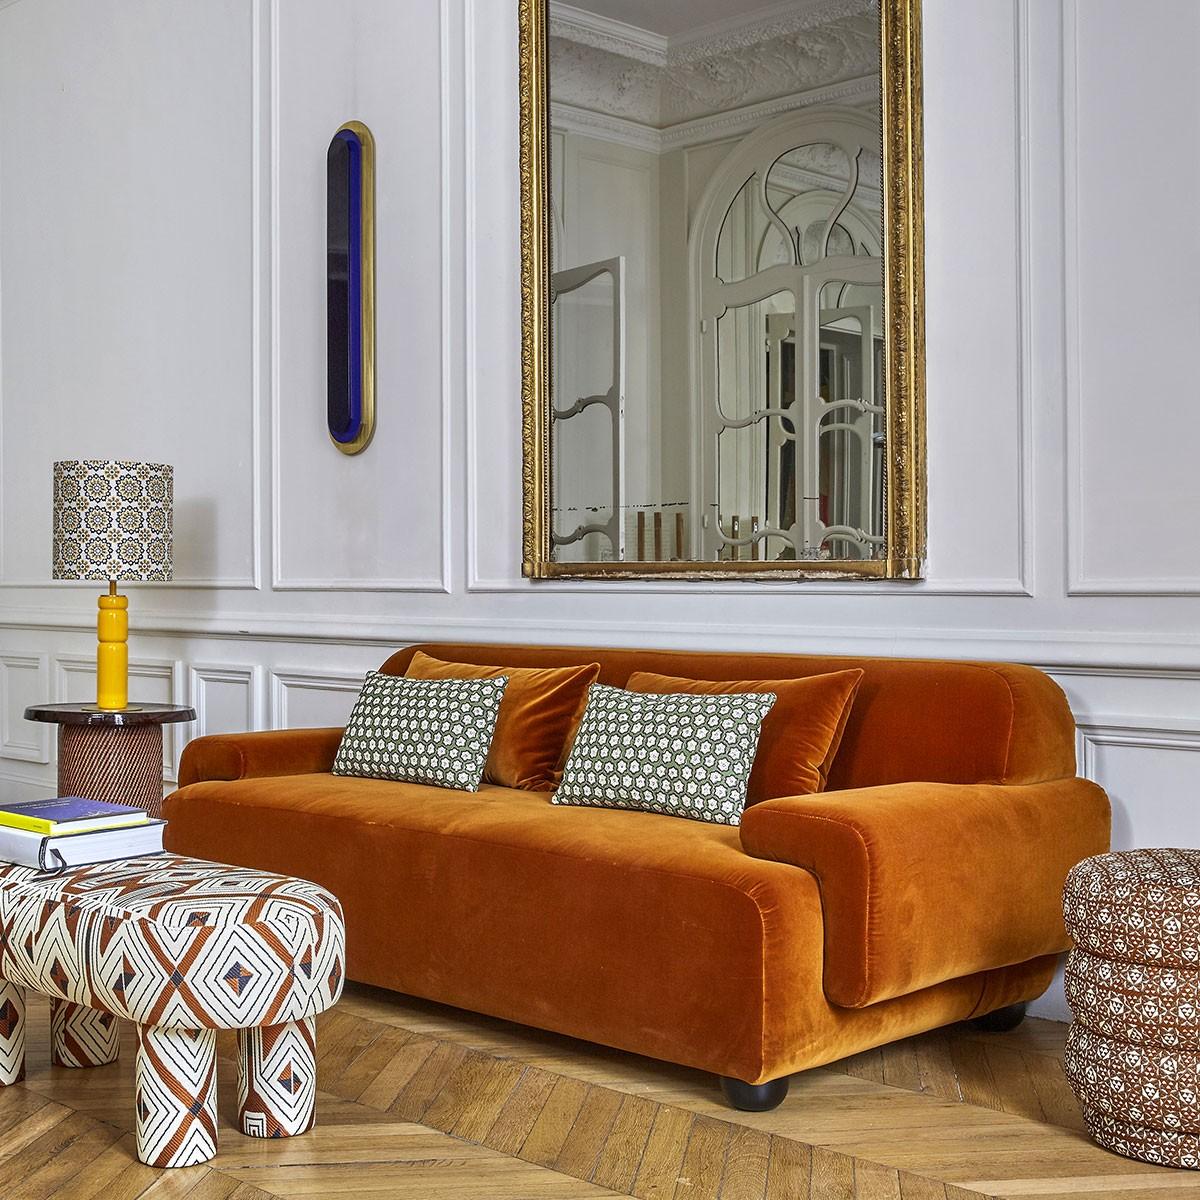 Popus Editions Lena 3 Seater Sofa in Sangria London Linen Fabric

It looks like it's straight out of a movie, with its generous curves and wide armrests. It is a real invitation to spend long Sundays with the family, comfortably seated in front of